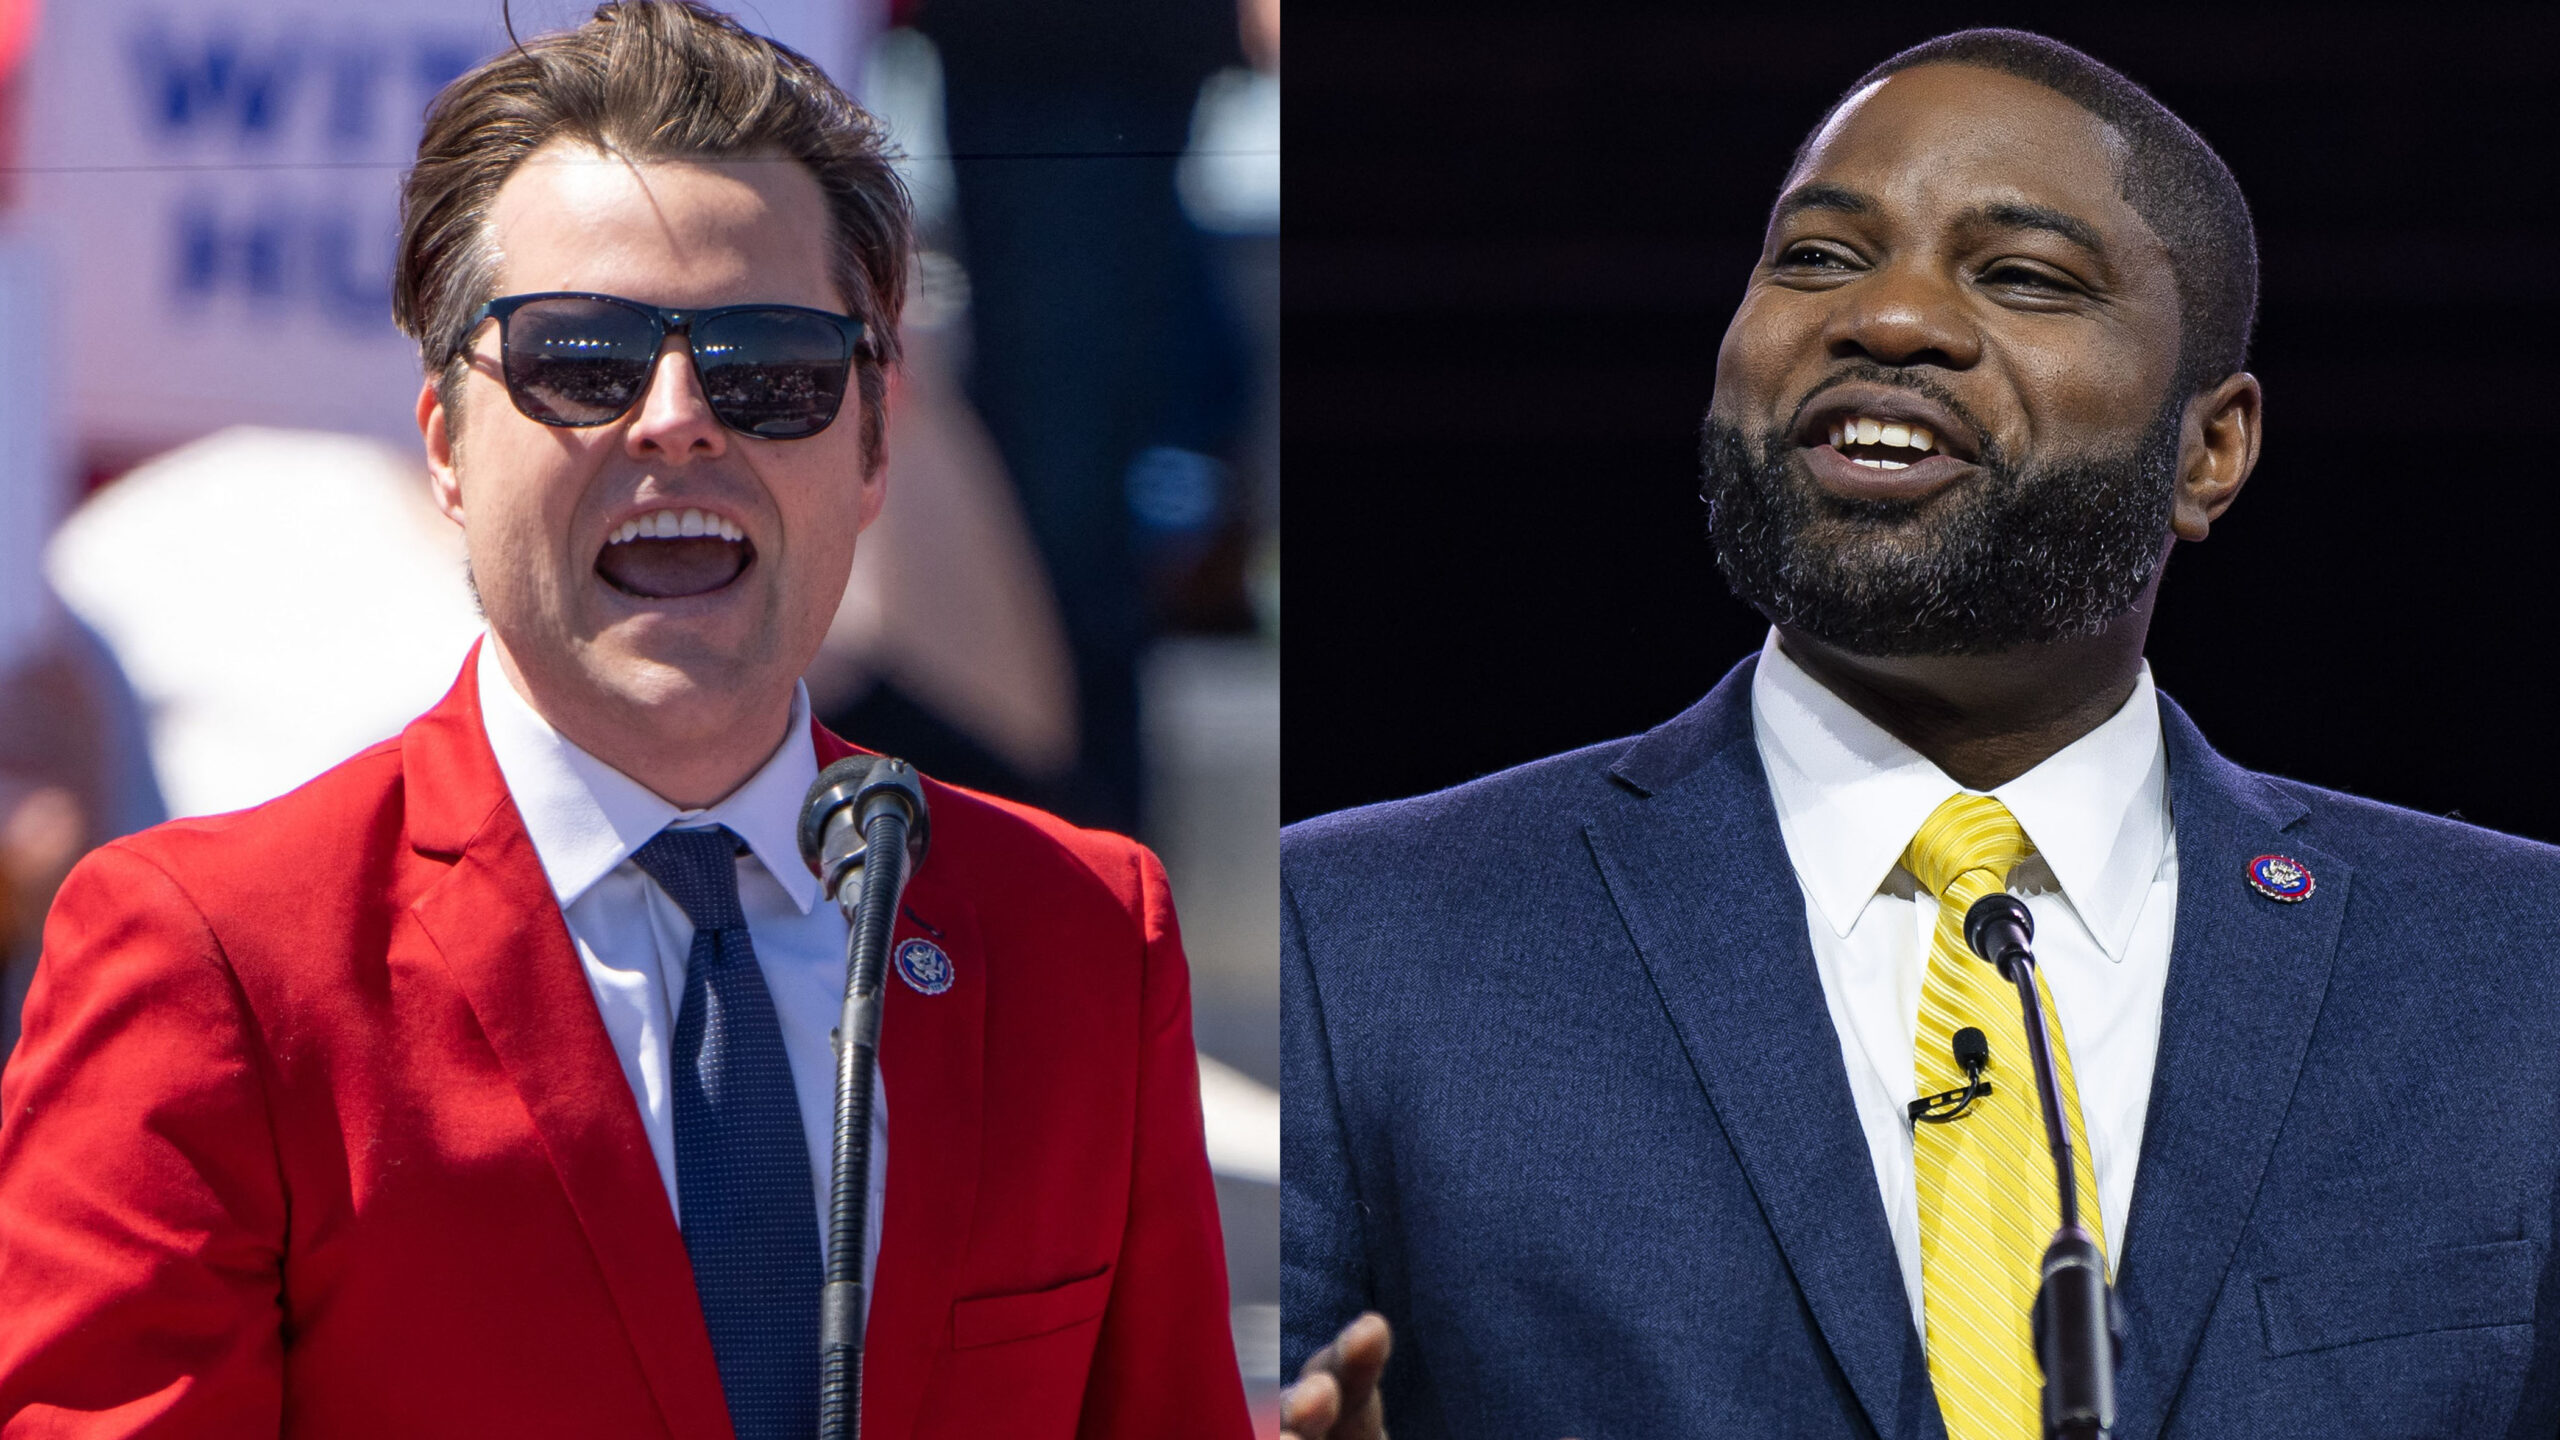 Gaetz and Donalds defend DeSantis over leaked 2018 debate prep, saying he was right.